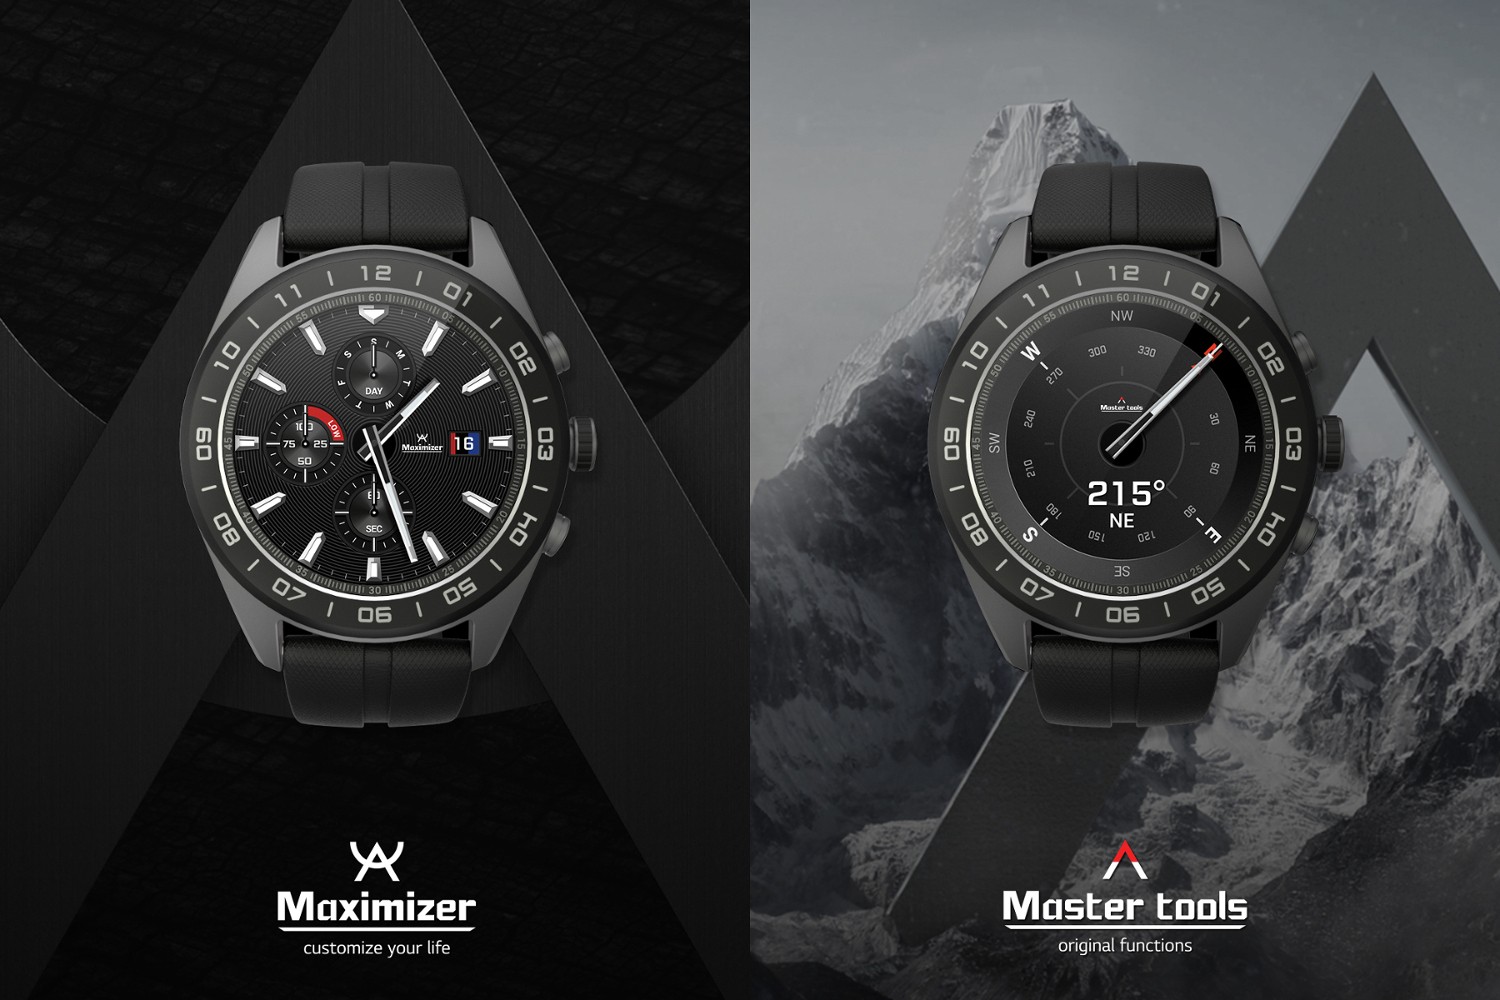 The front view of the LG Watch W7 with the Maximizer on one screen, and Master Tools on the other